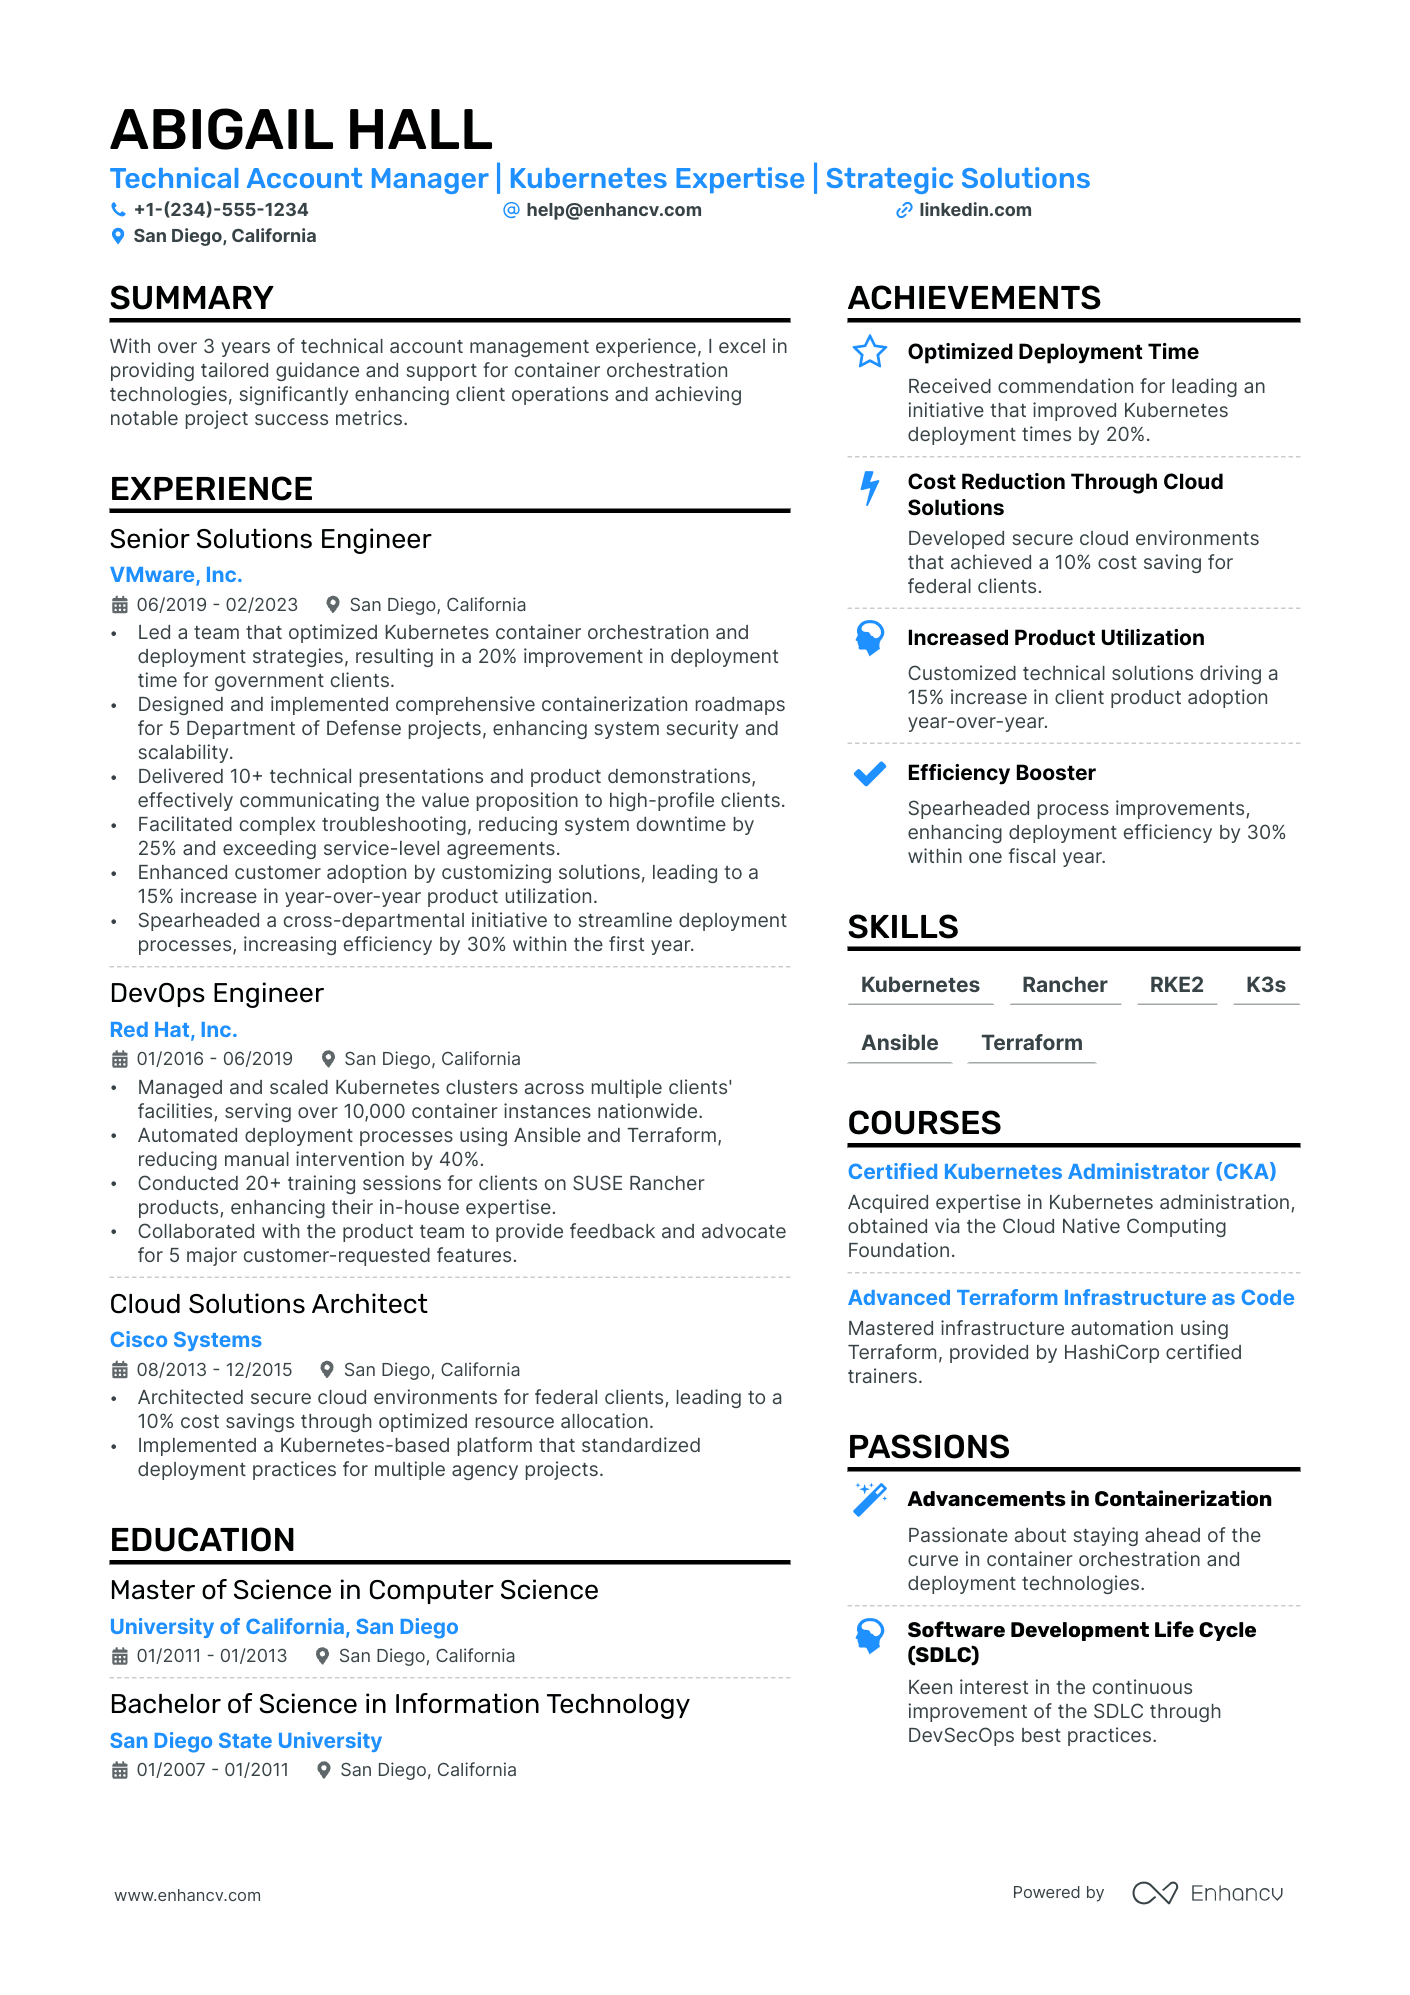 Technical Account Manager resume example